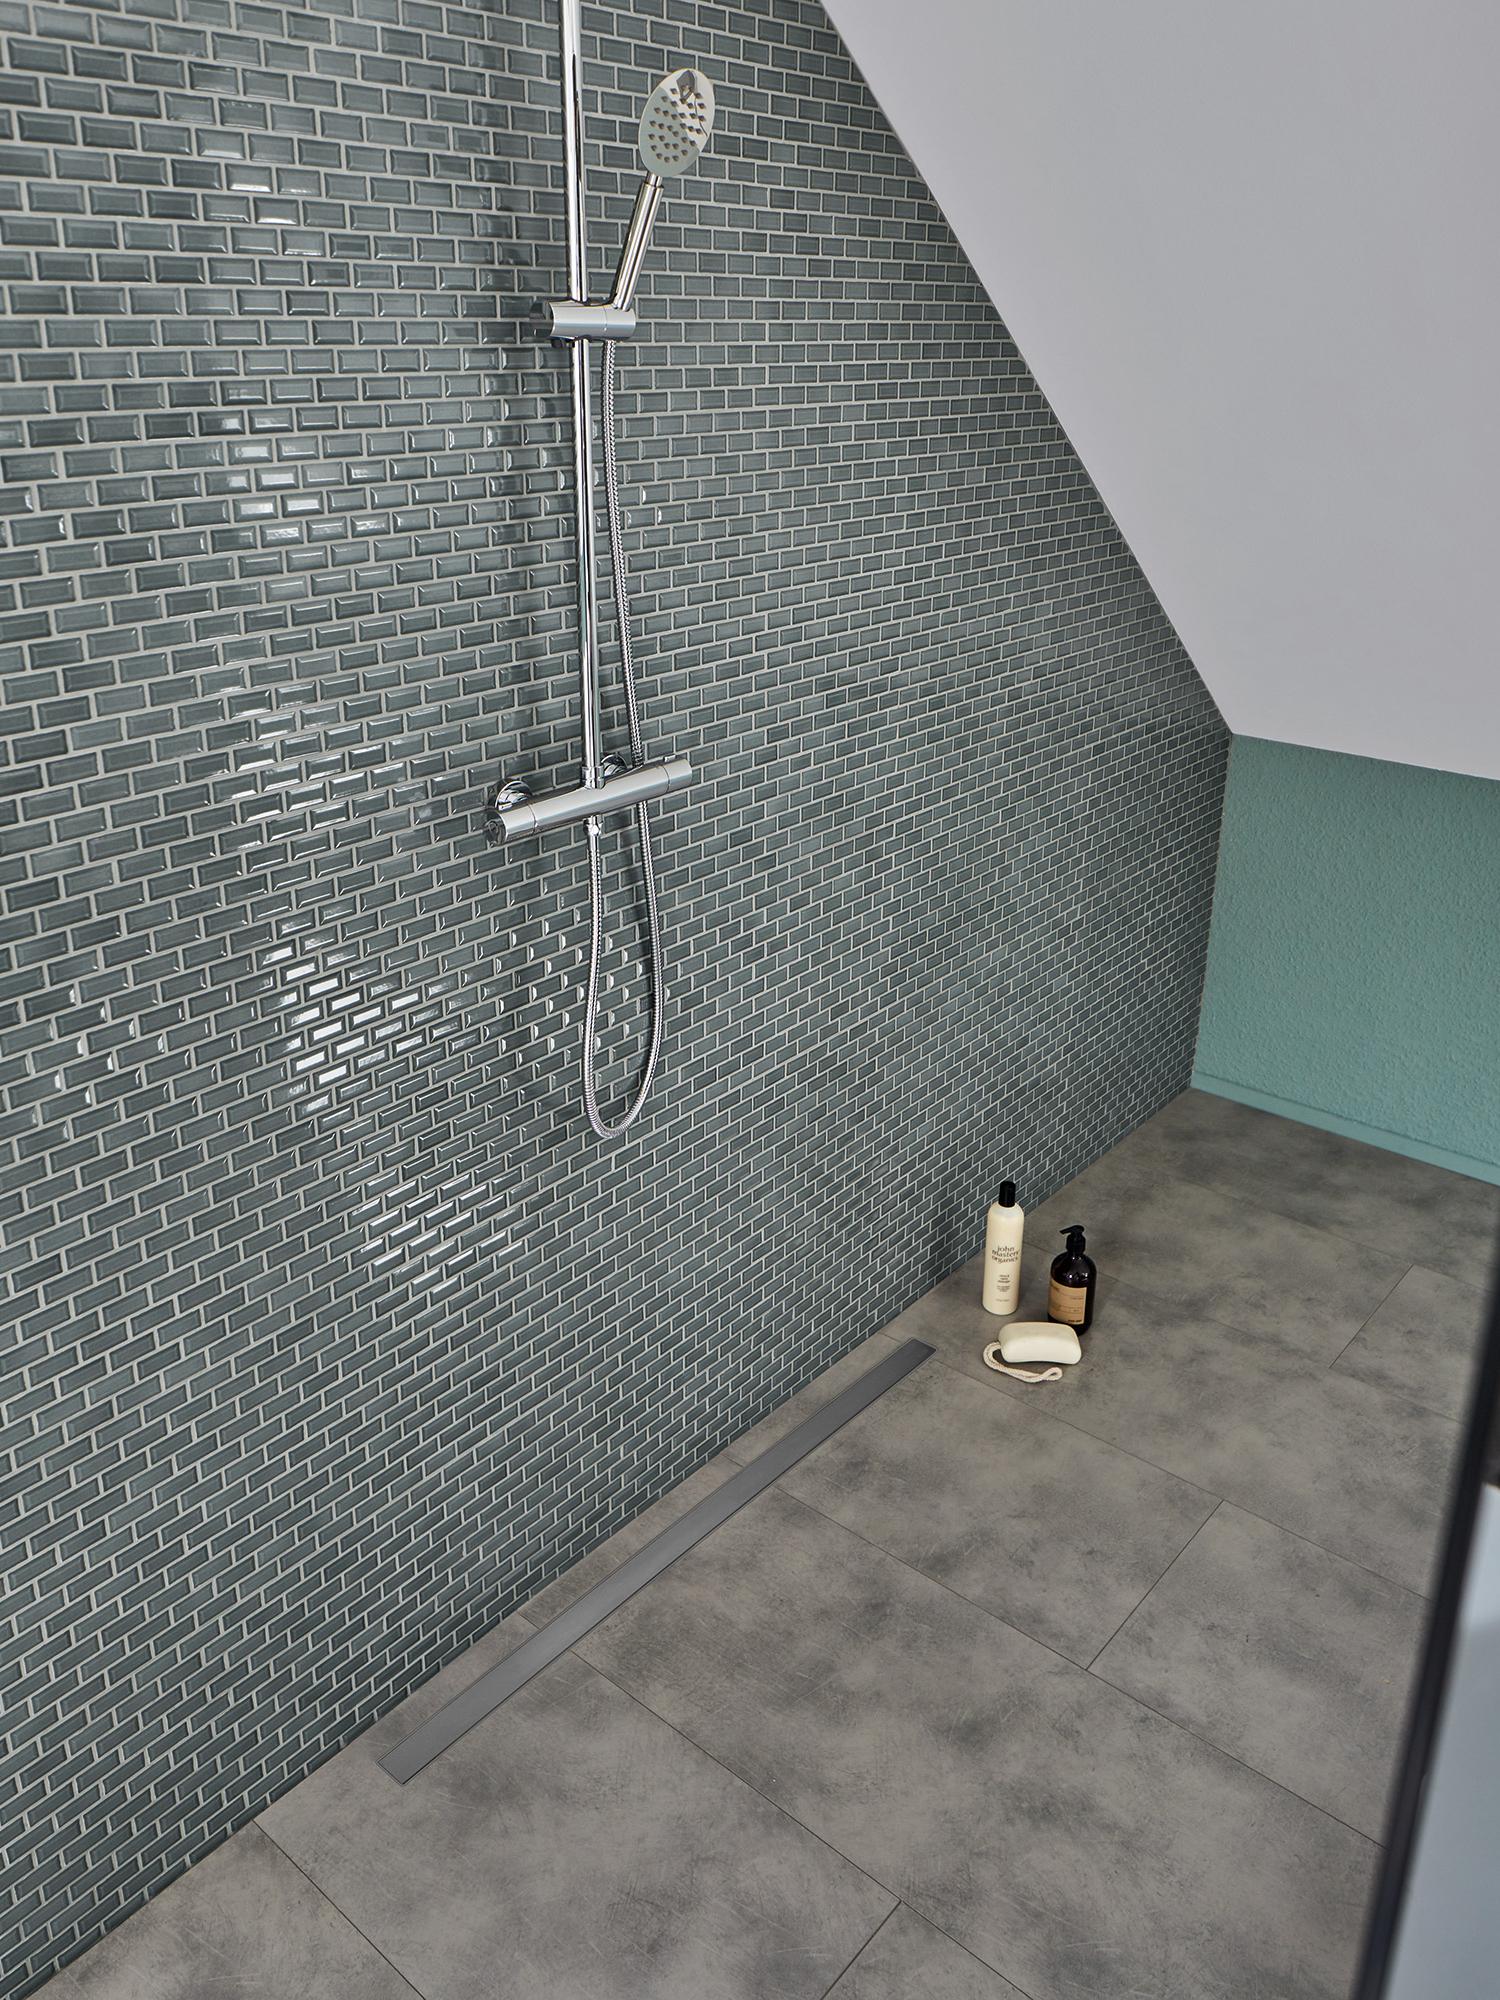 Kermi shower board, LINE with exclusive channel cover, drain along wall